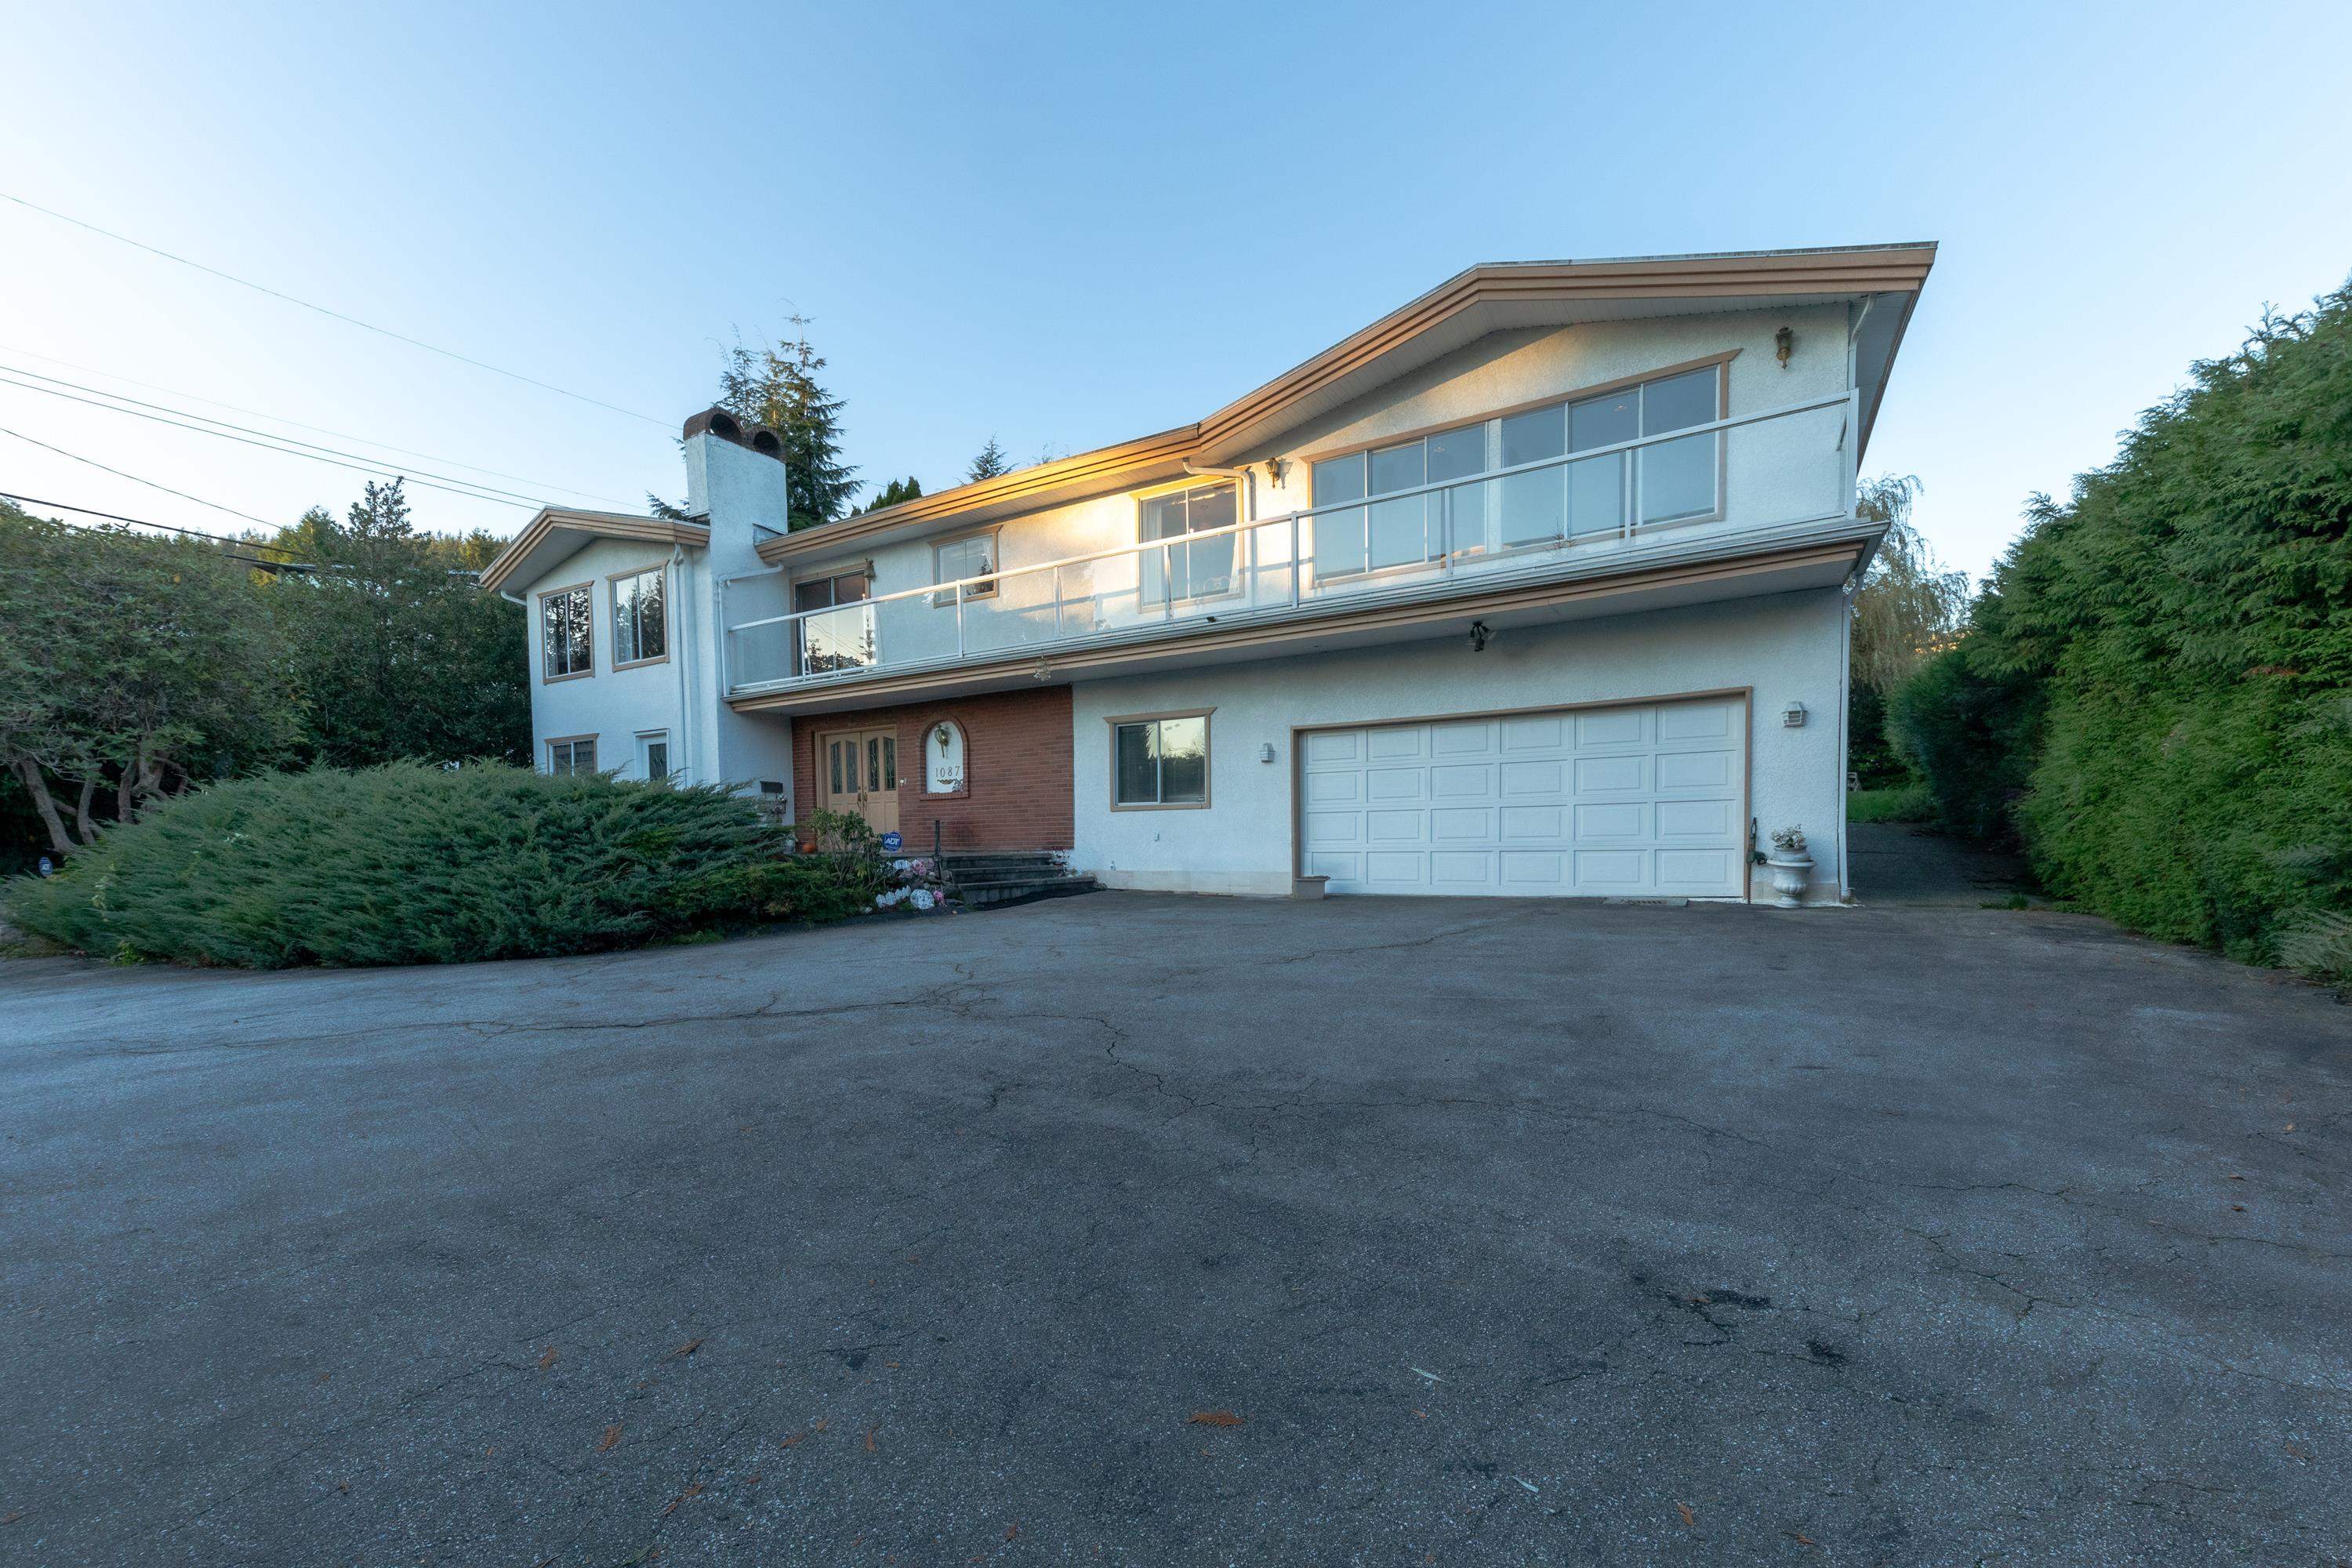 Listing image of 1087 EYREMOUNT DRIVE